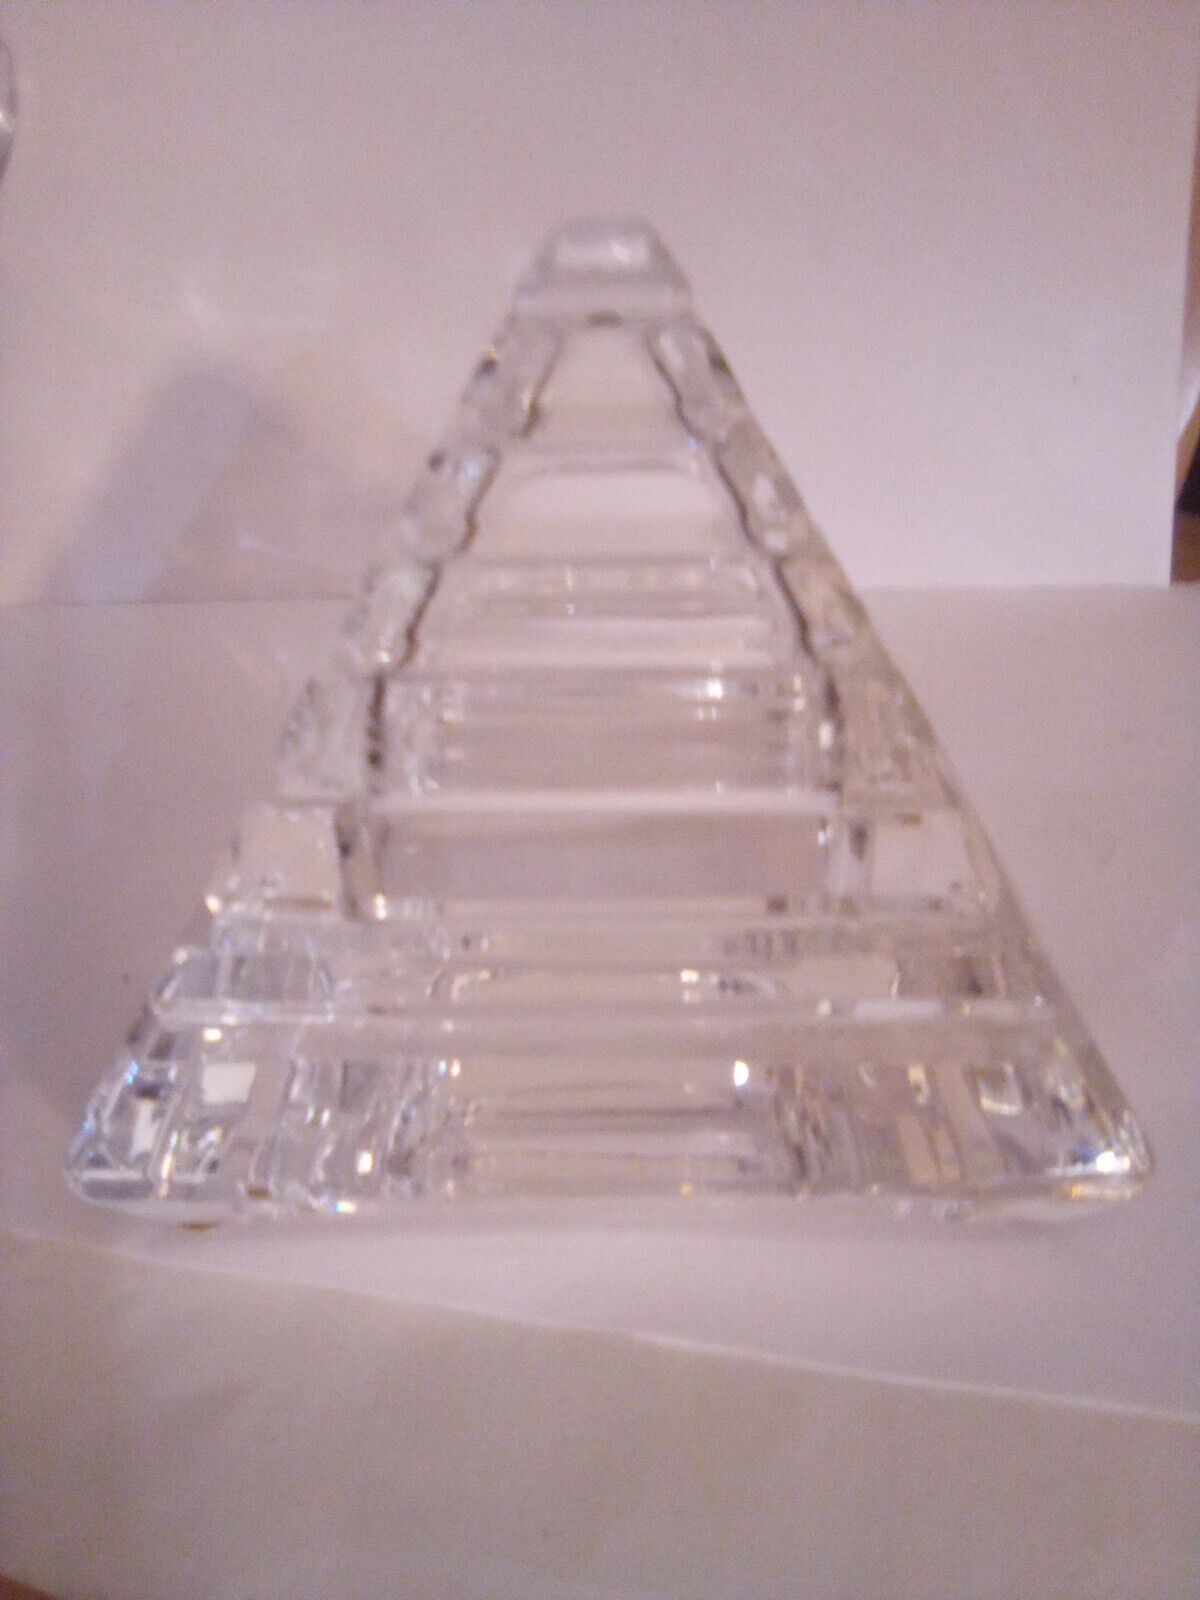 Vintage Tiffany & Co Crystal Stepped Pyramid Trinket Box. Excellent Condition.